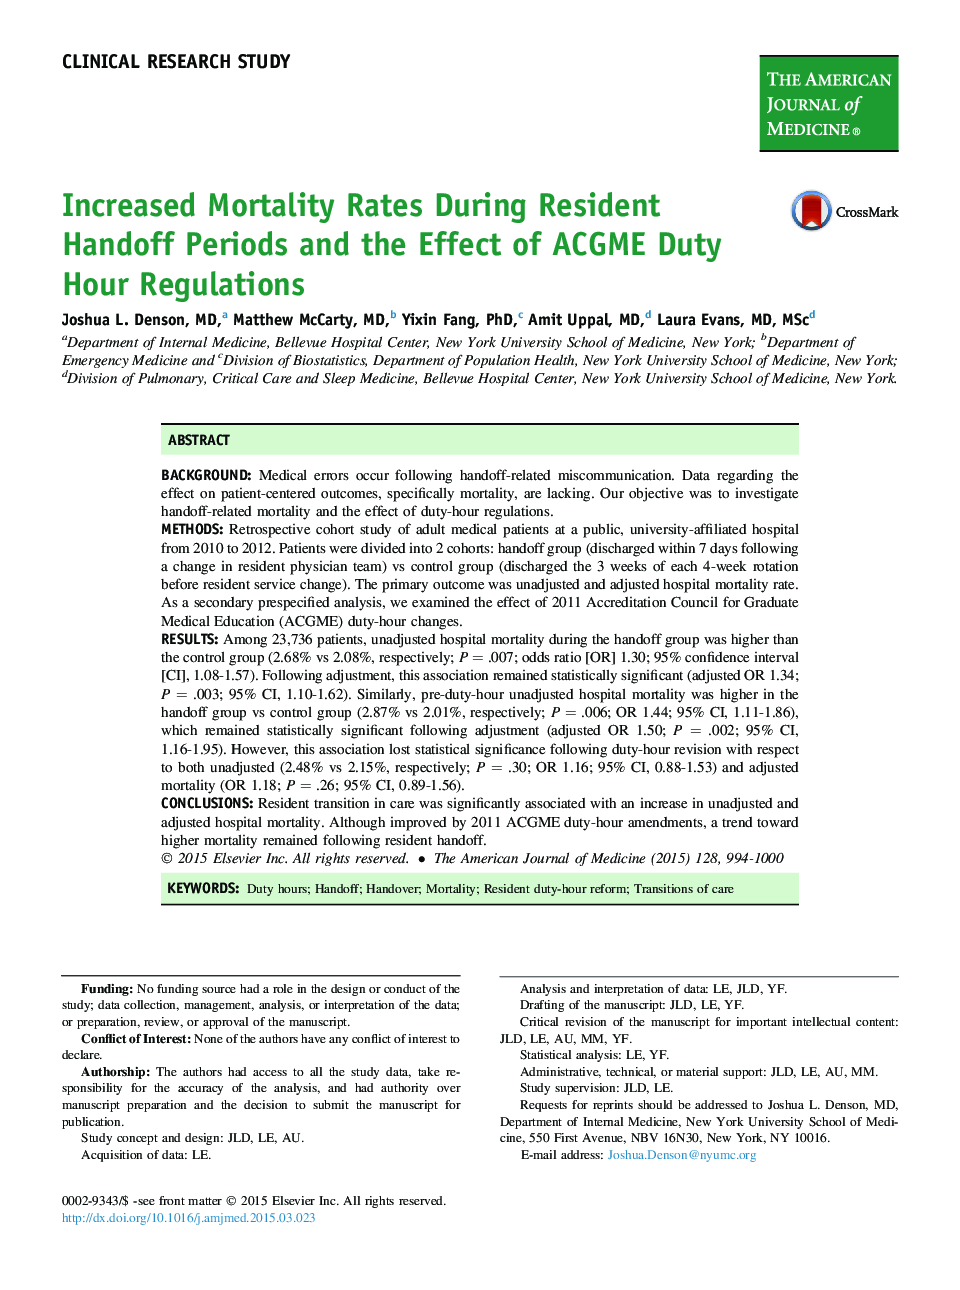 Increased Mortality Rates During Resident Handoff Periods and the Effect of ACGME Duty Hour Regulations